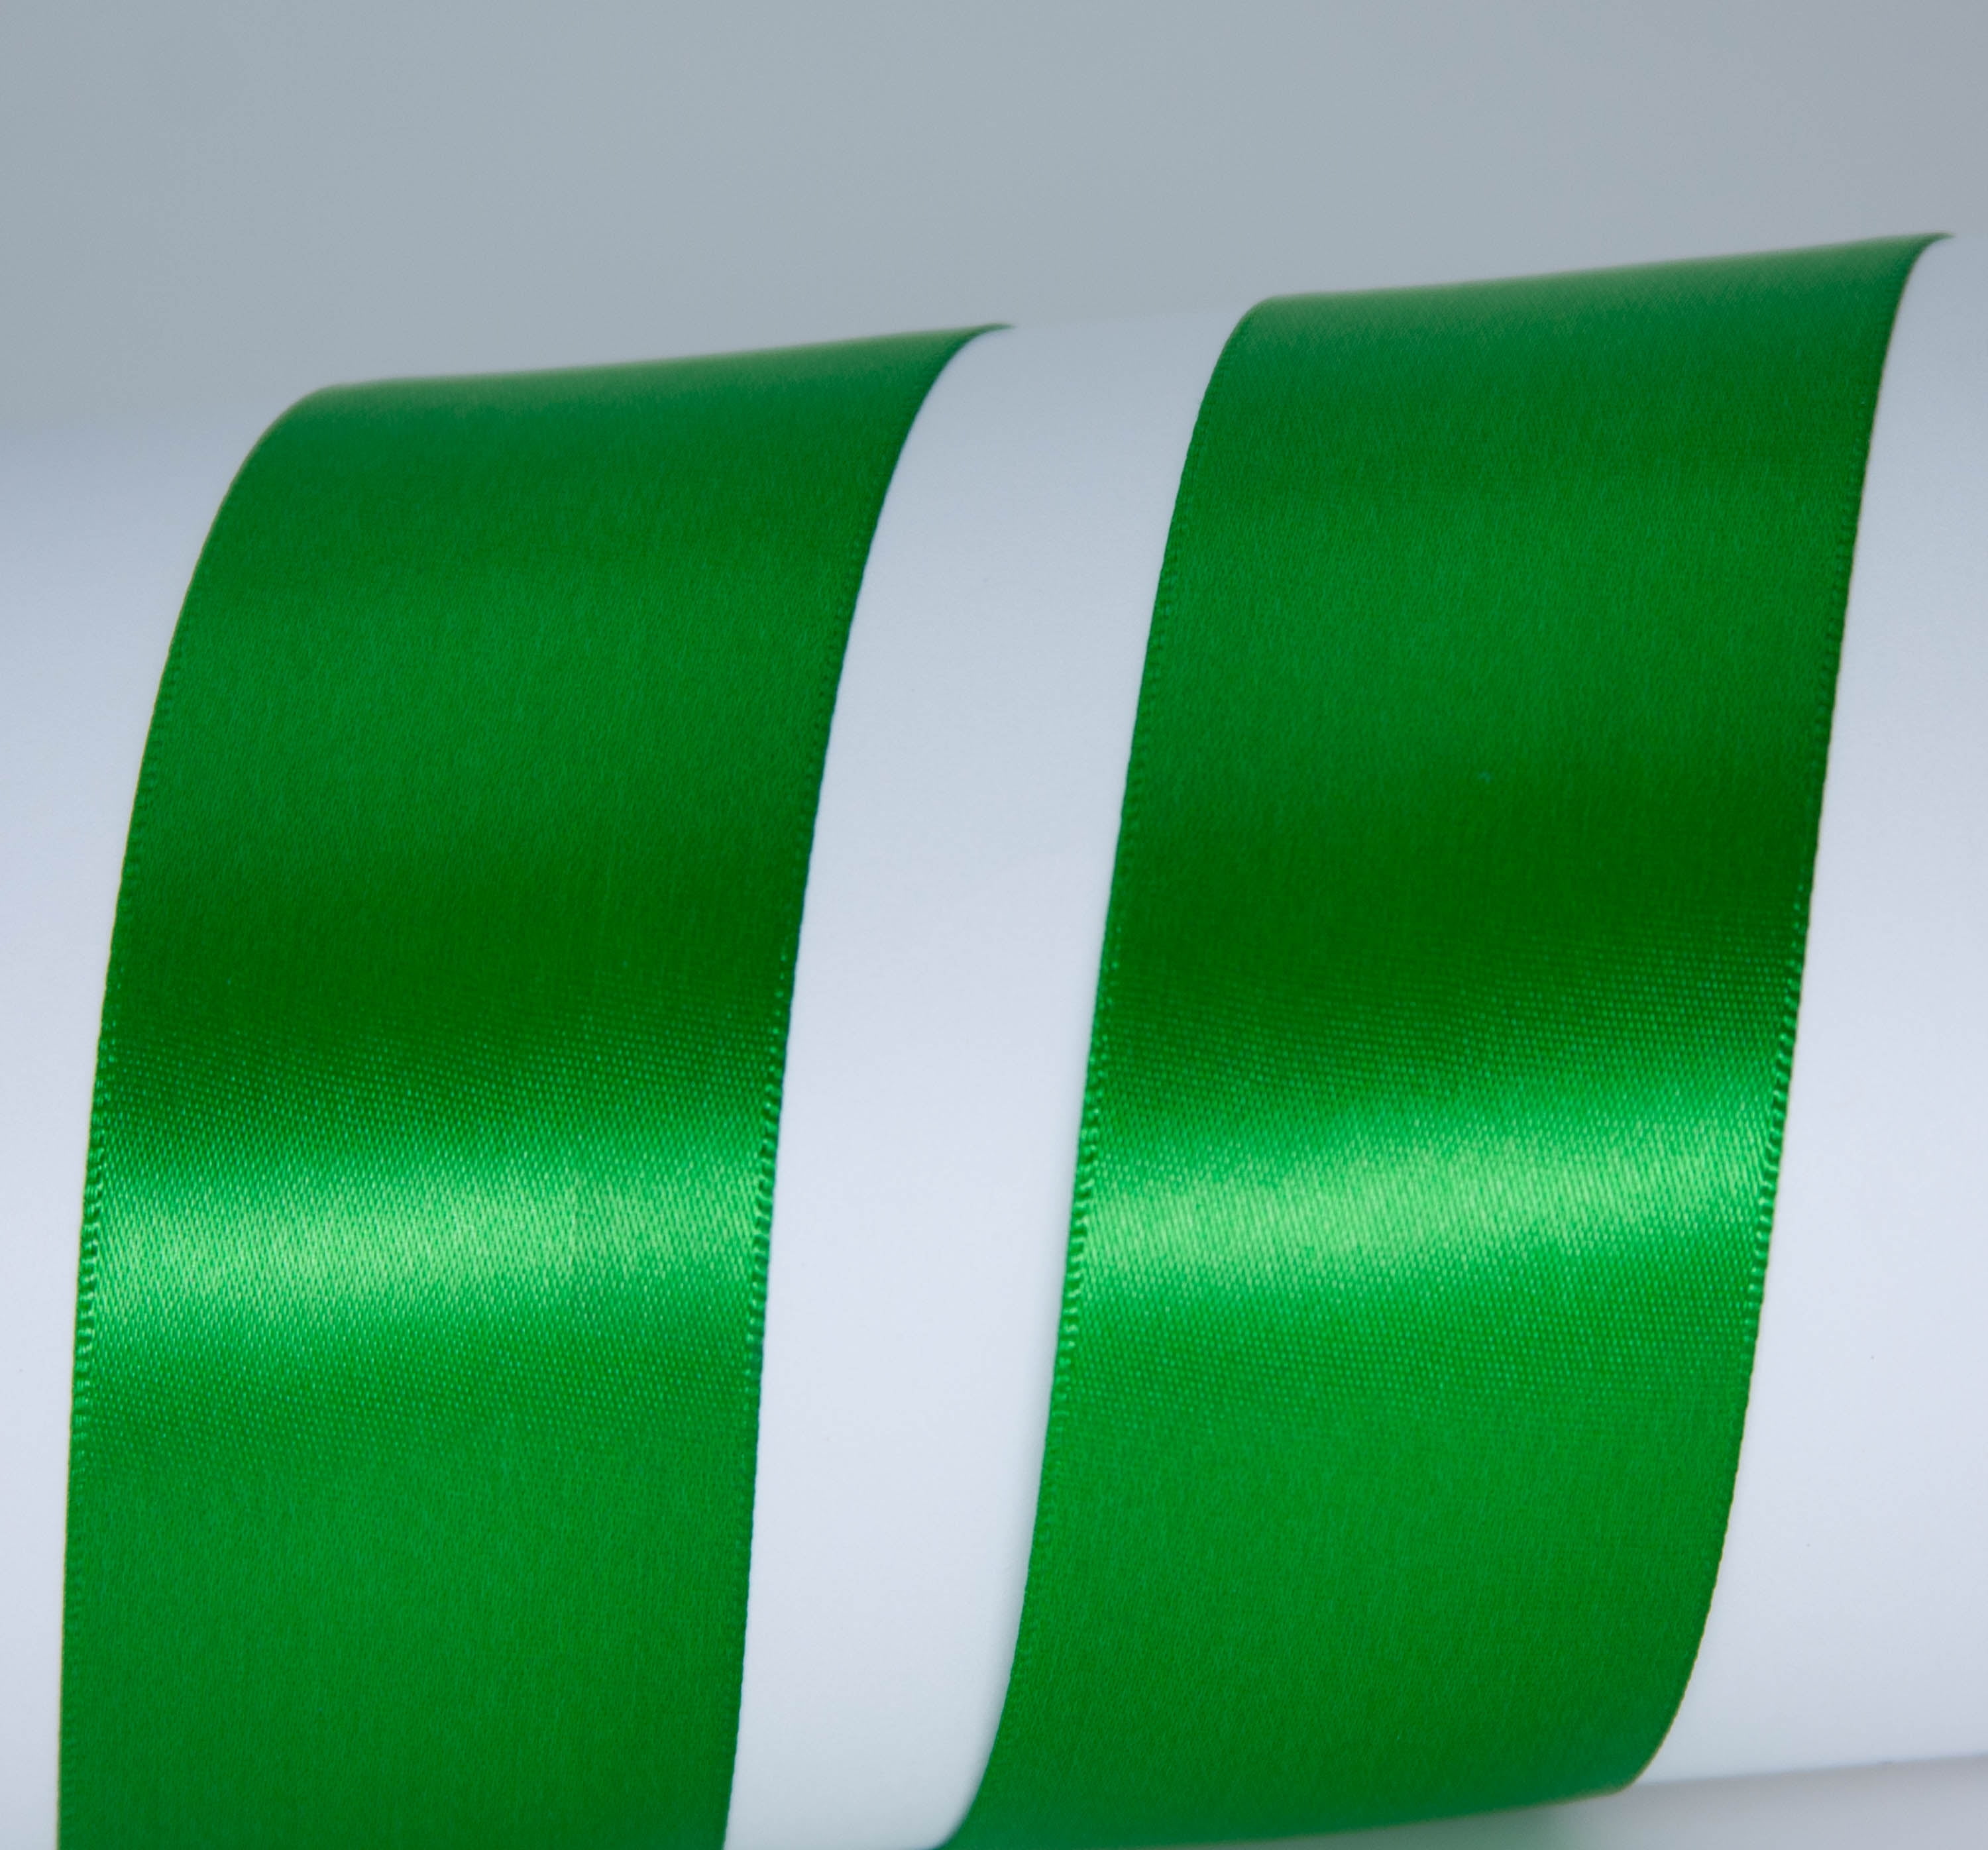  Stuffvisor Satin Green Ribbon - 1 inch x 50 Yards, Double Face  Solid Color Ribbon Roll, 100% Polyester Ribbon for Gift Wrapping, Crafts,  Hair and Multiple Decorations : Office Products